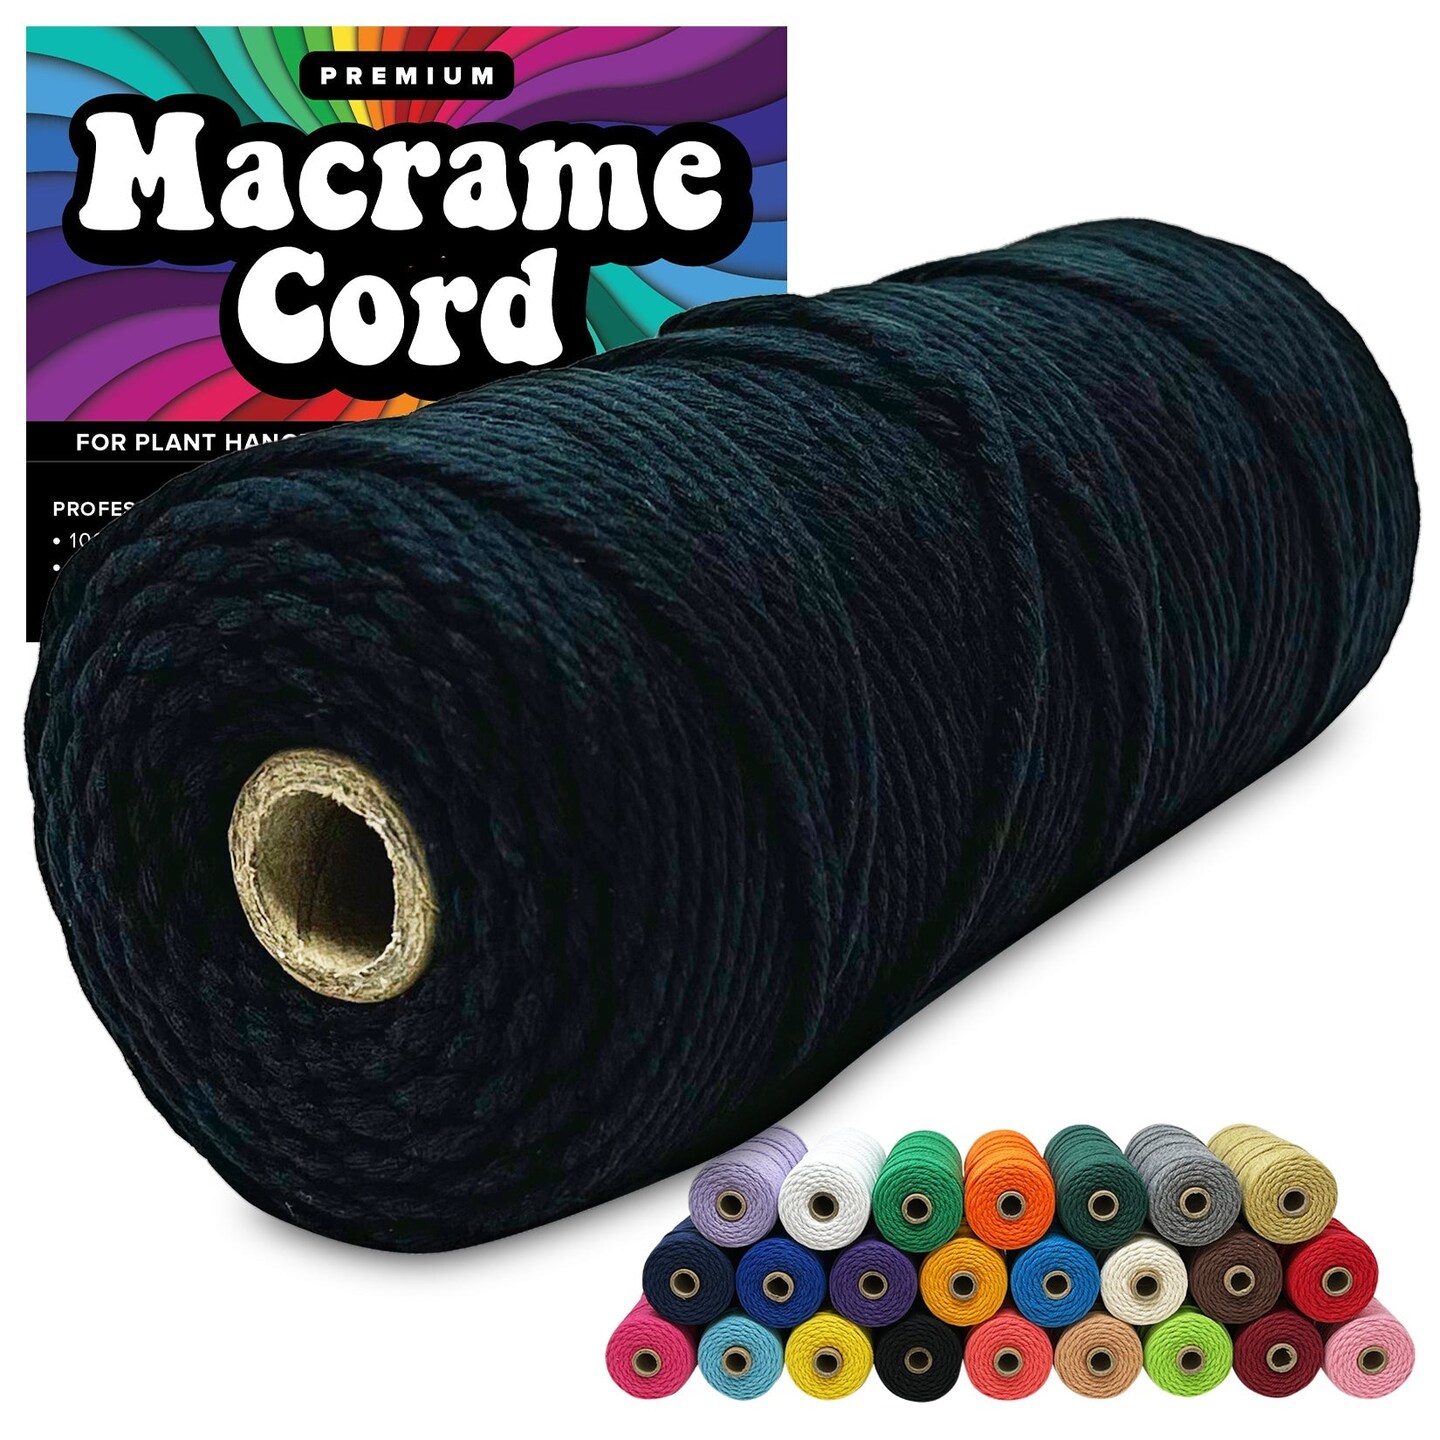 3mm Macrame Cord 3mm Thick Cords for Macrame Yarn 100% Cotton Colored  Macrame Rope Cord Natural Craft Cord String Yarn Supplies 325 Feet 3 mm  Cotton